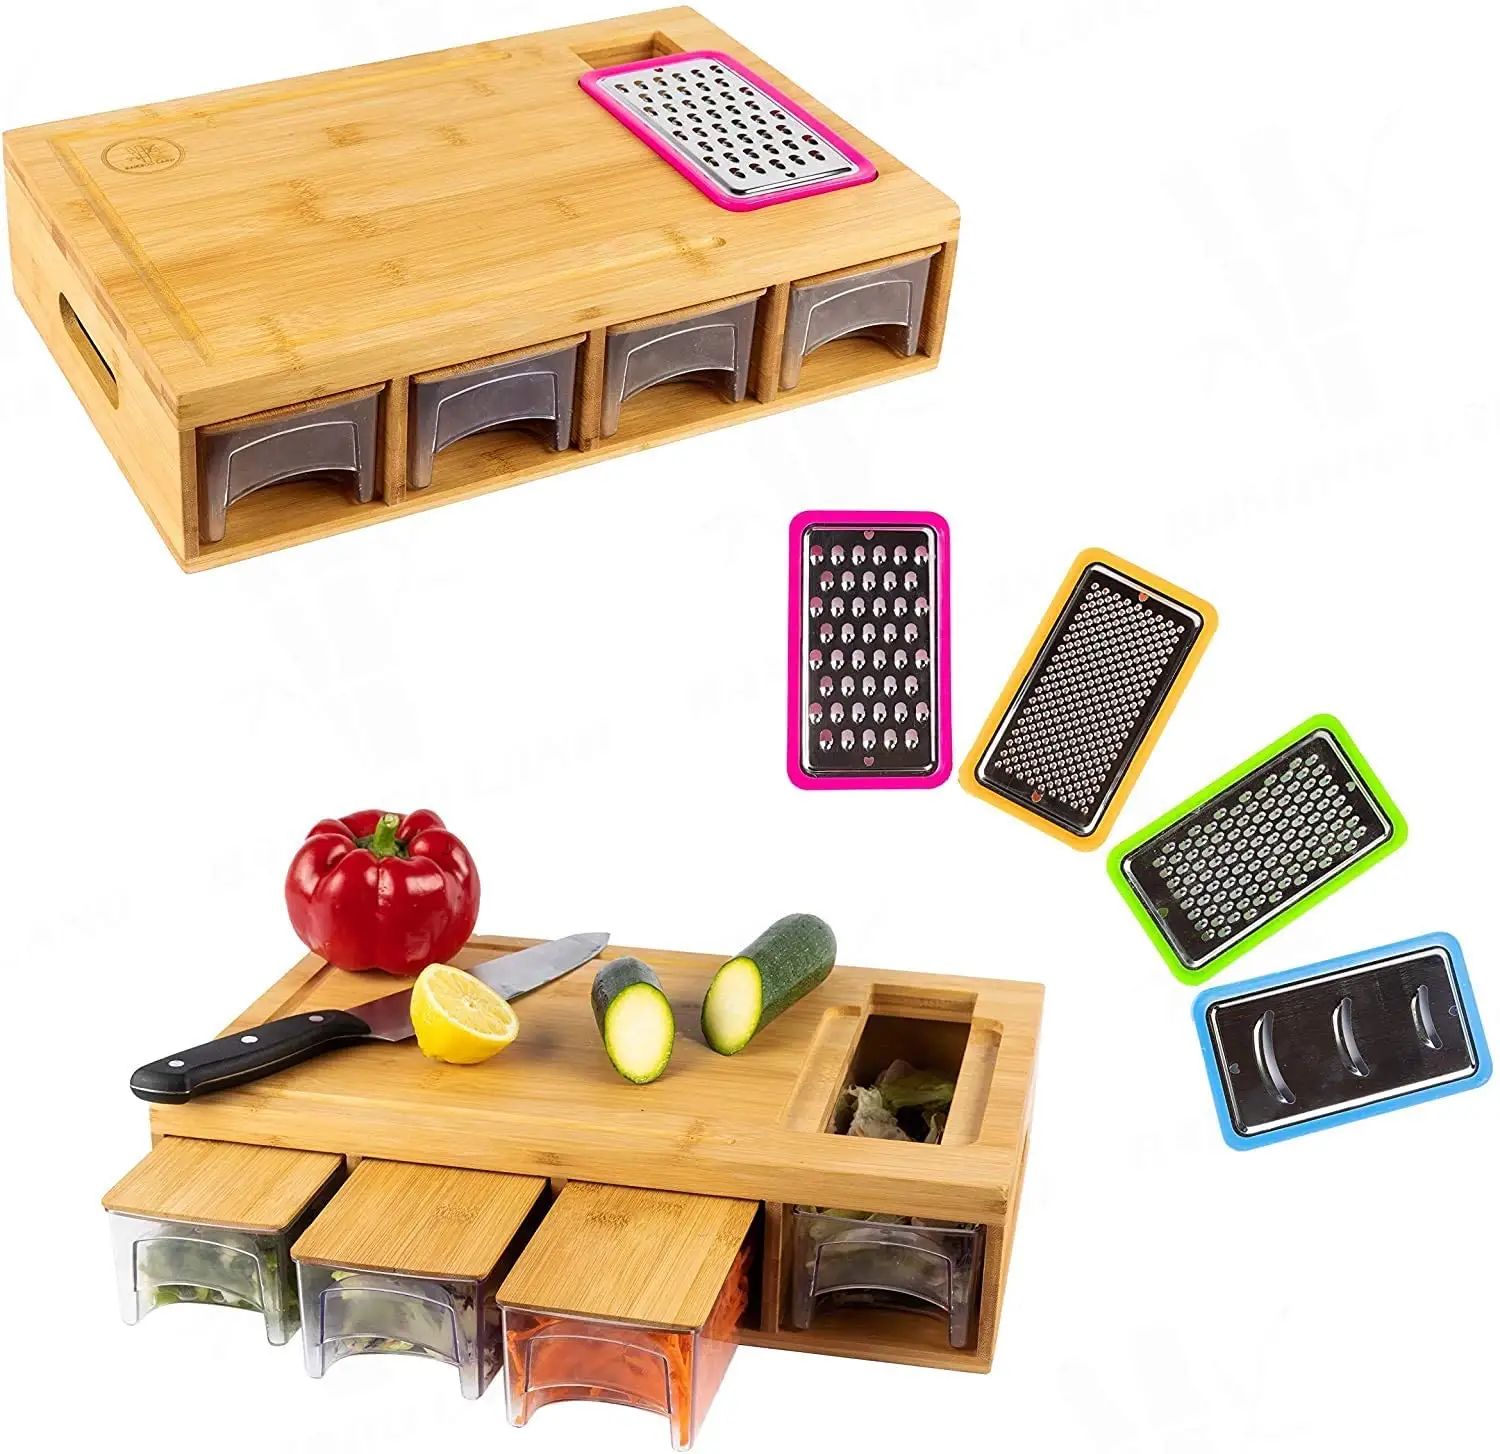 Bamboo Cutting Board With trays/drawers/container and bamboo lids, Chopping board with juice grooves, handles & food sliding